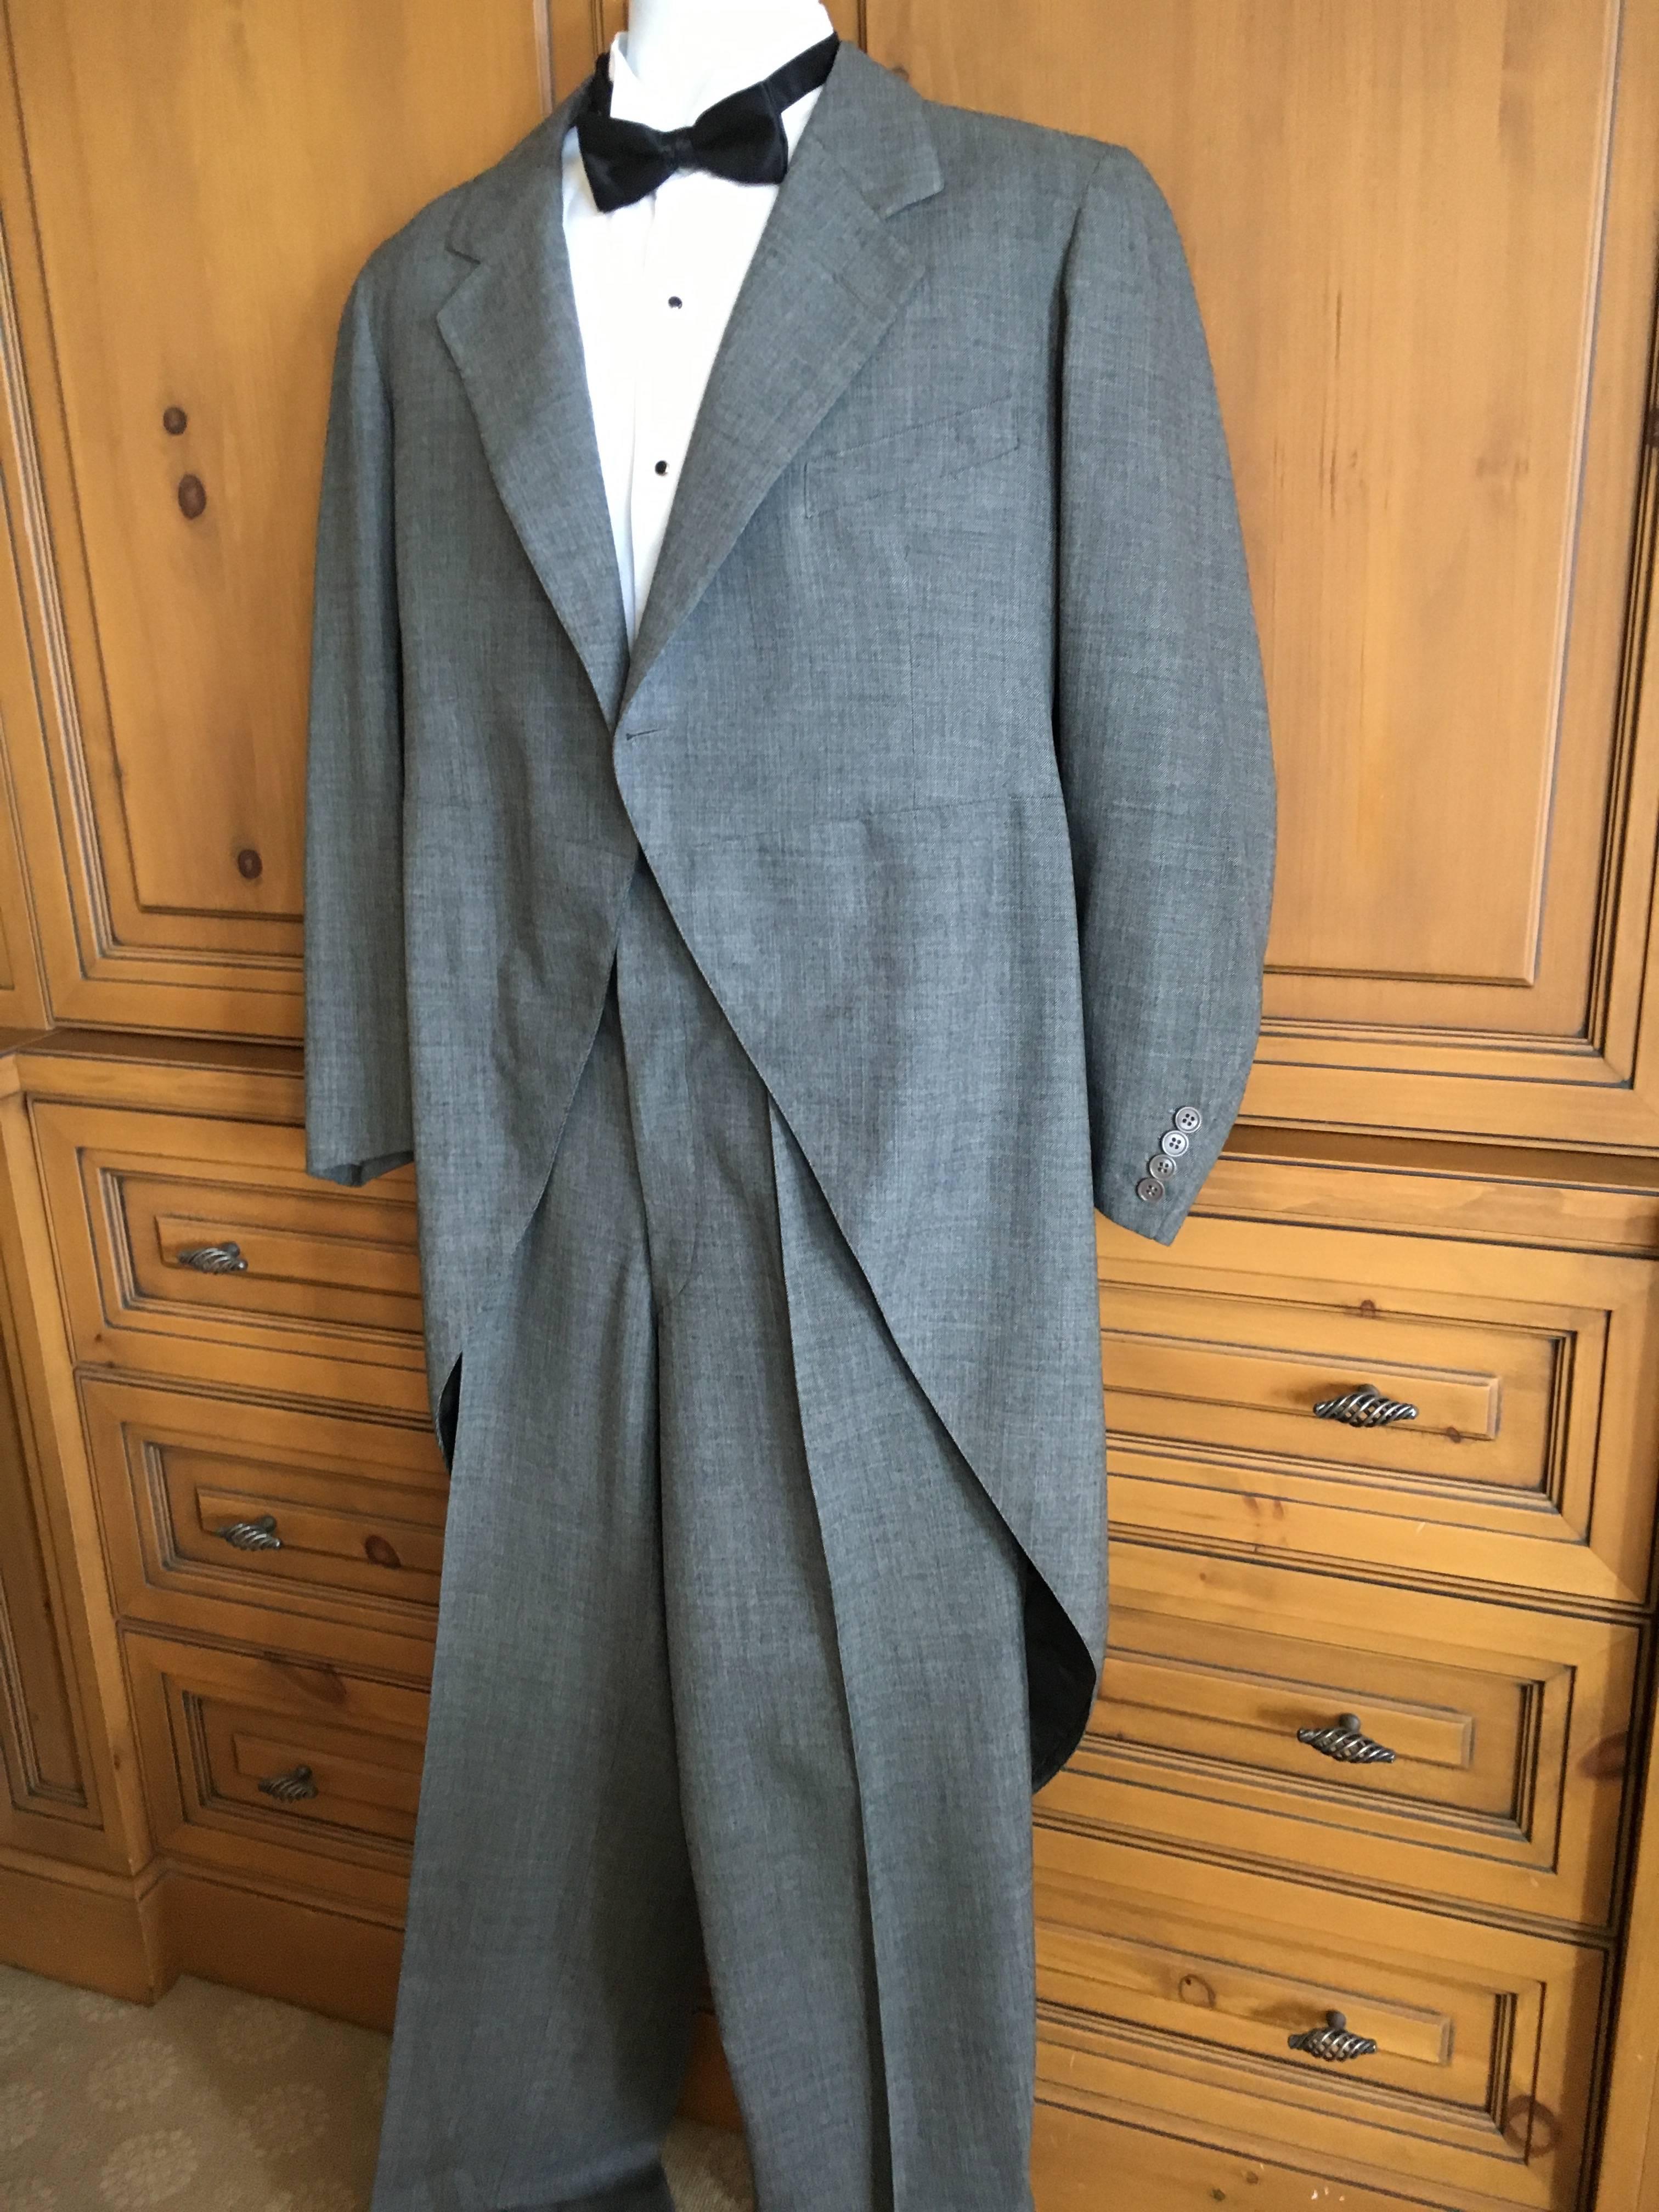 1941 Men's Gray Formal Cutaway Tailcoat Suit Dunne & Co. In Excellent Condition For Sale In Cloverdale, CA